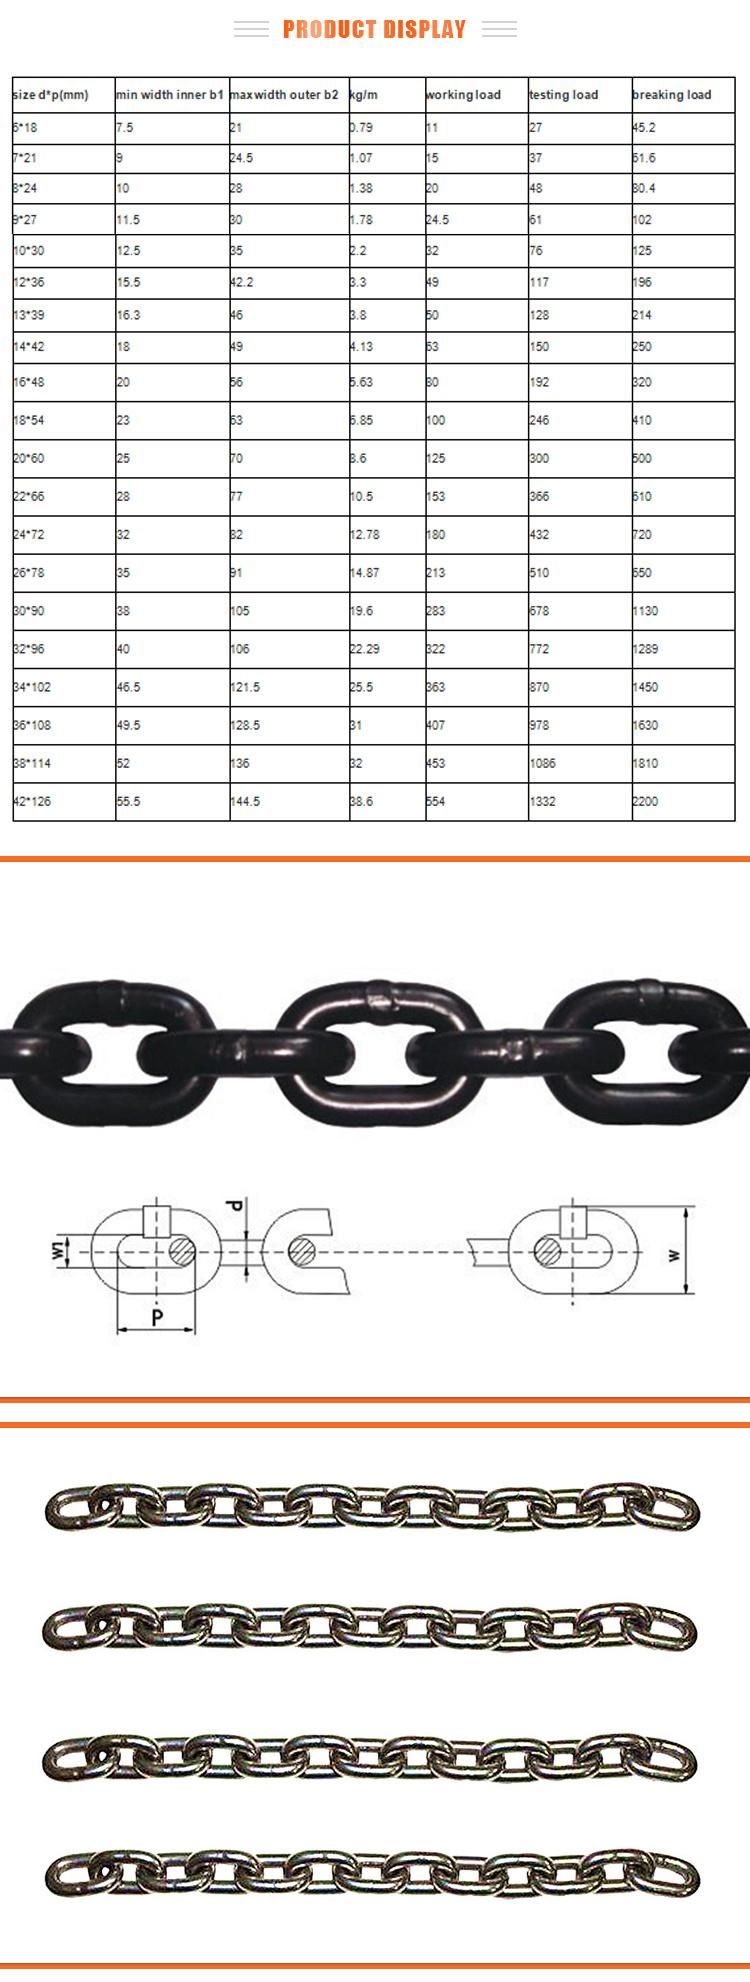 High Quality Towing Alloy Steel G70 Lifting Chain with Hooks and Ring